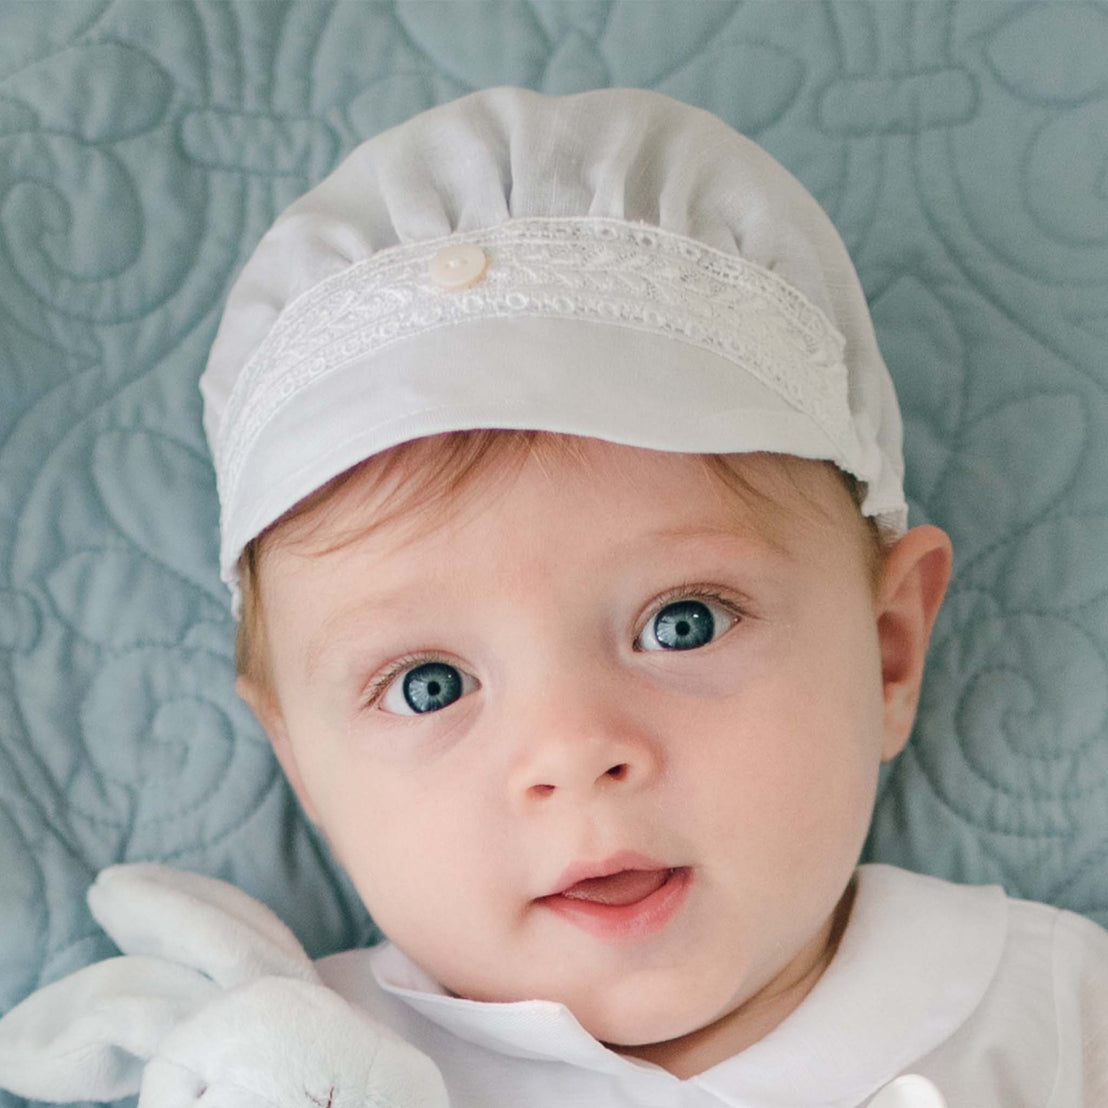 A baby with bright blue eyes wearing a handmade Oliver Linen Cap and a white outfit lies on a soft, light blue patterned blanket. The baby gazes directly at the camera with a small plush toy visible at the bottom left of the image.